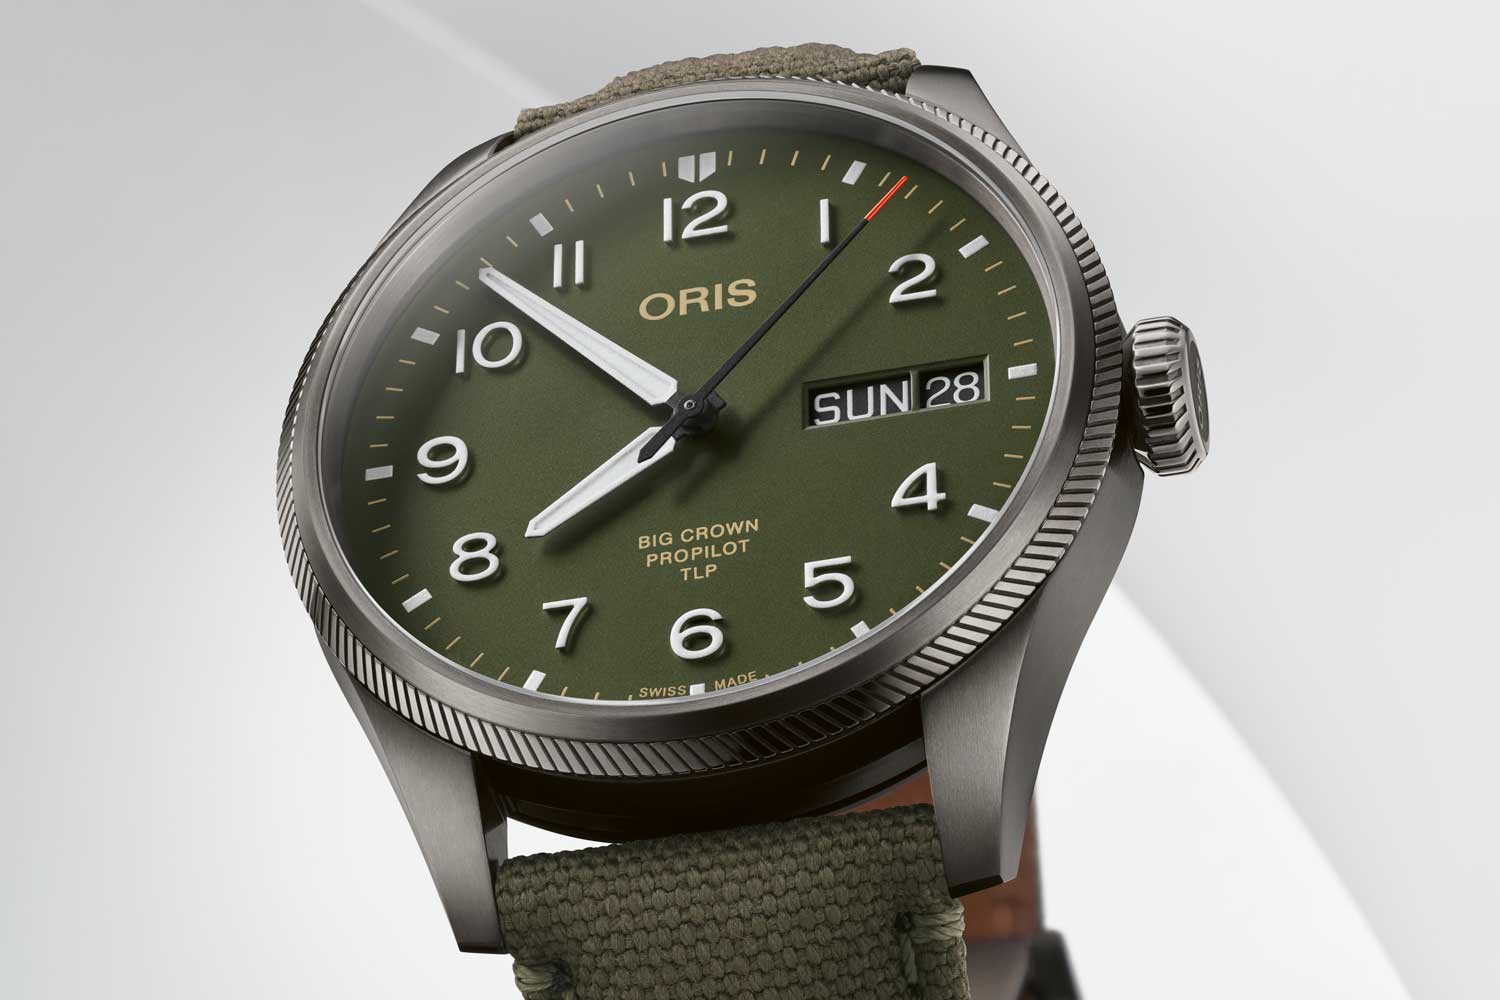 The Oris TLP Albacete limited edition was developed in partnership with the Tactical Leadership Programme (TLP), an elite pilot training programme based in Albacete, Spain.